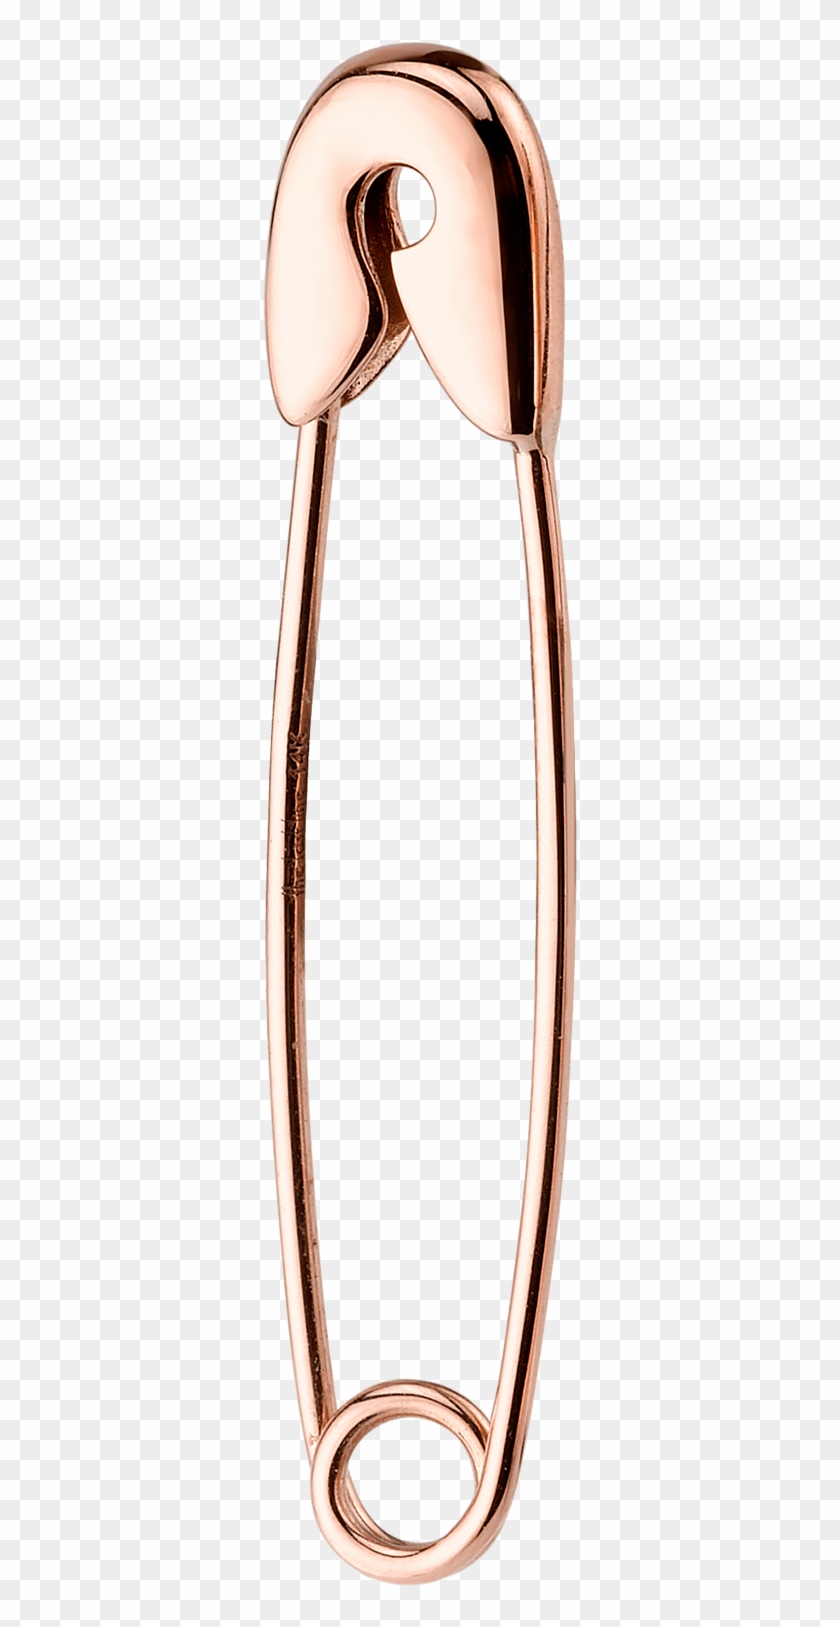 Safety Pin Png - Safety Pin #1185859